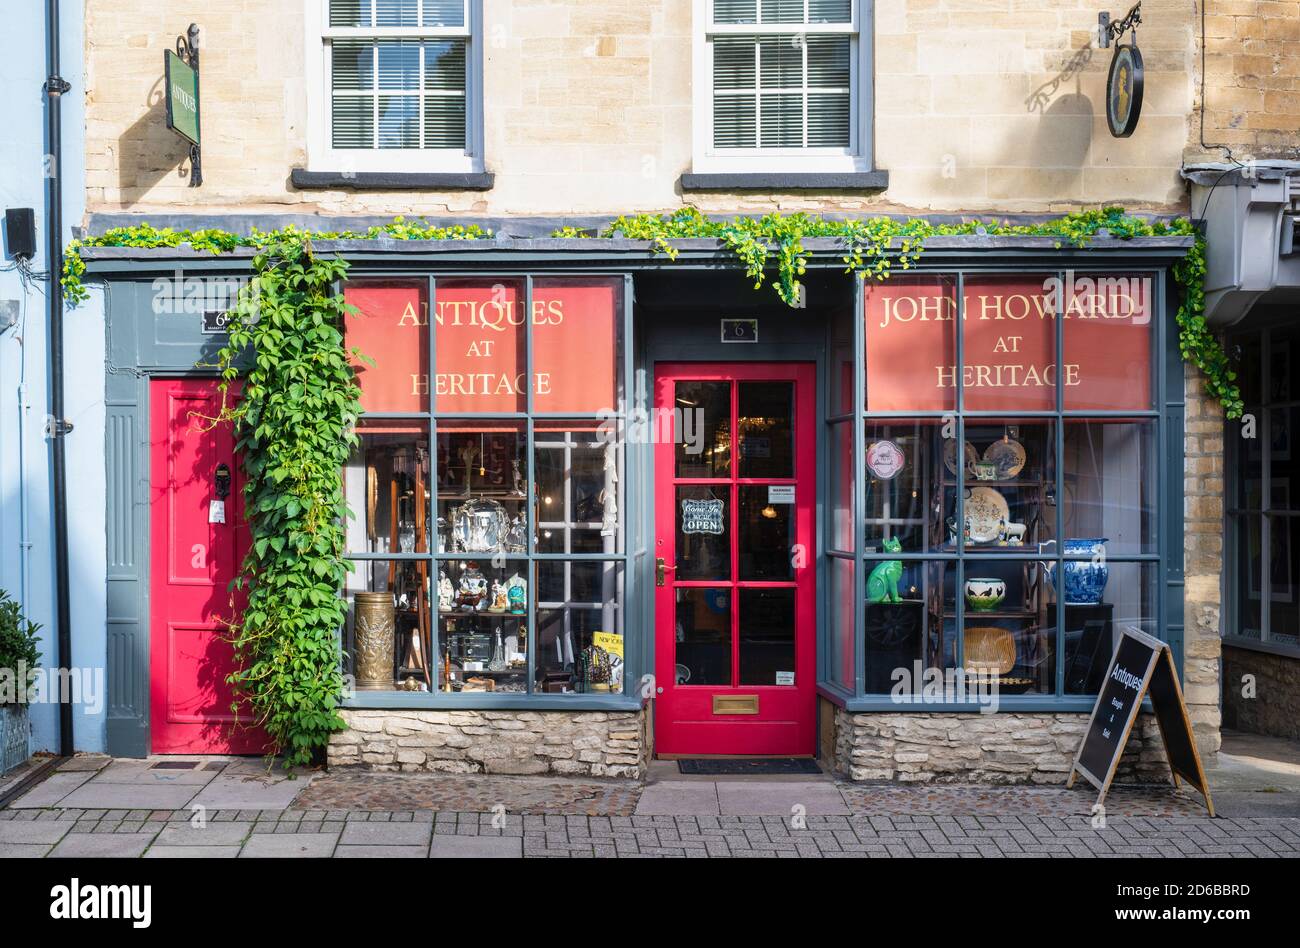 Antiques at Heritage. Antique shop. Woodstock, Oxfordshire, England Stock Photo